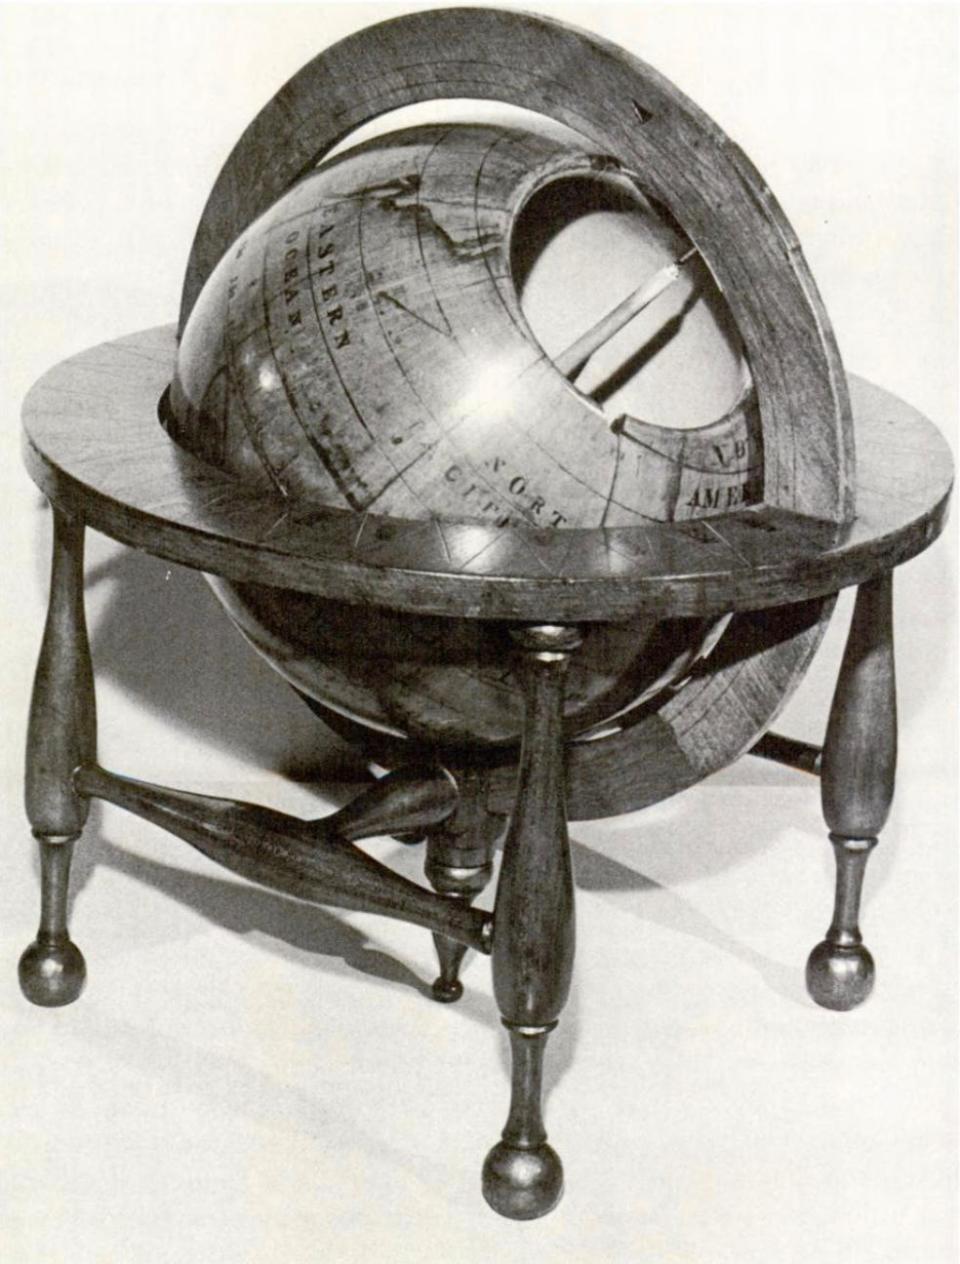 Capt. John Cleves Symmes used this wooden model to demonstrate his theory of the Hollow Earth.